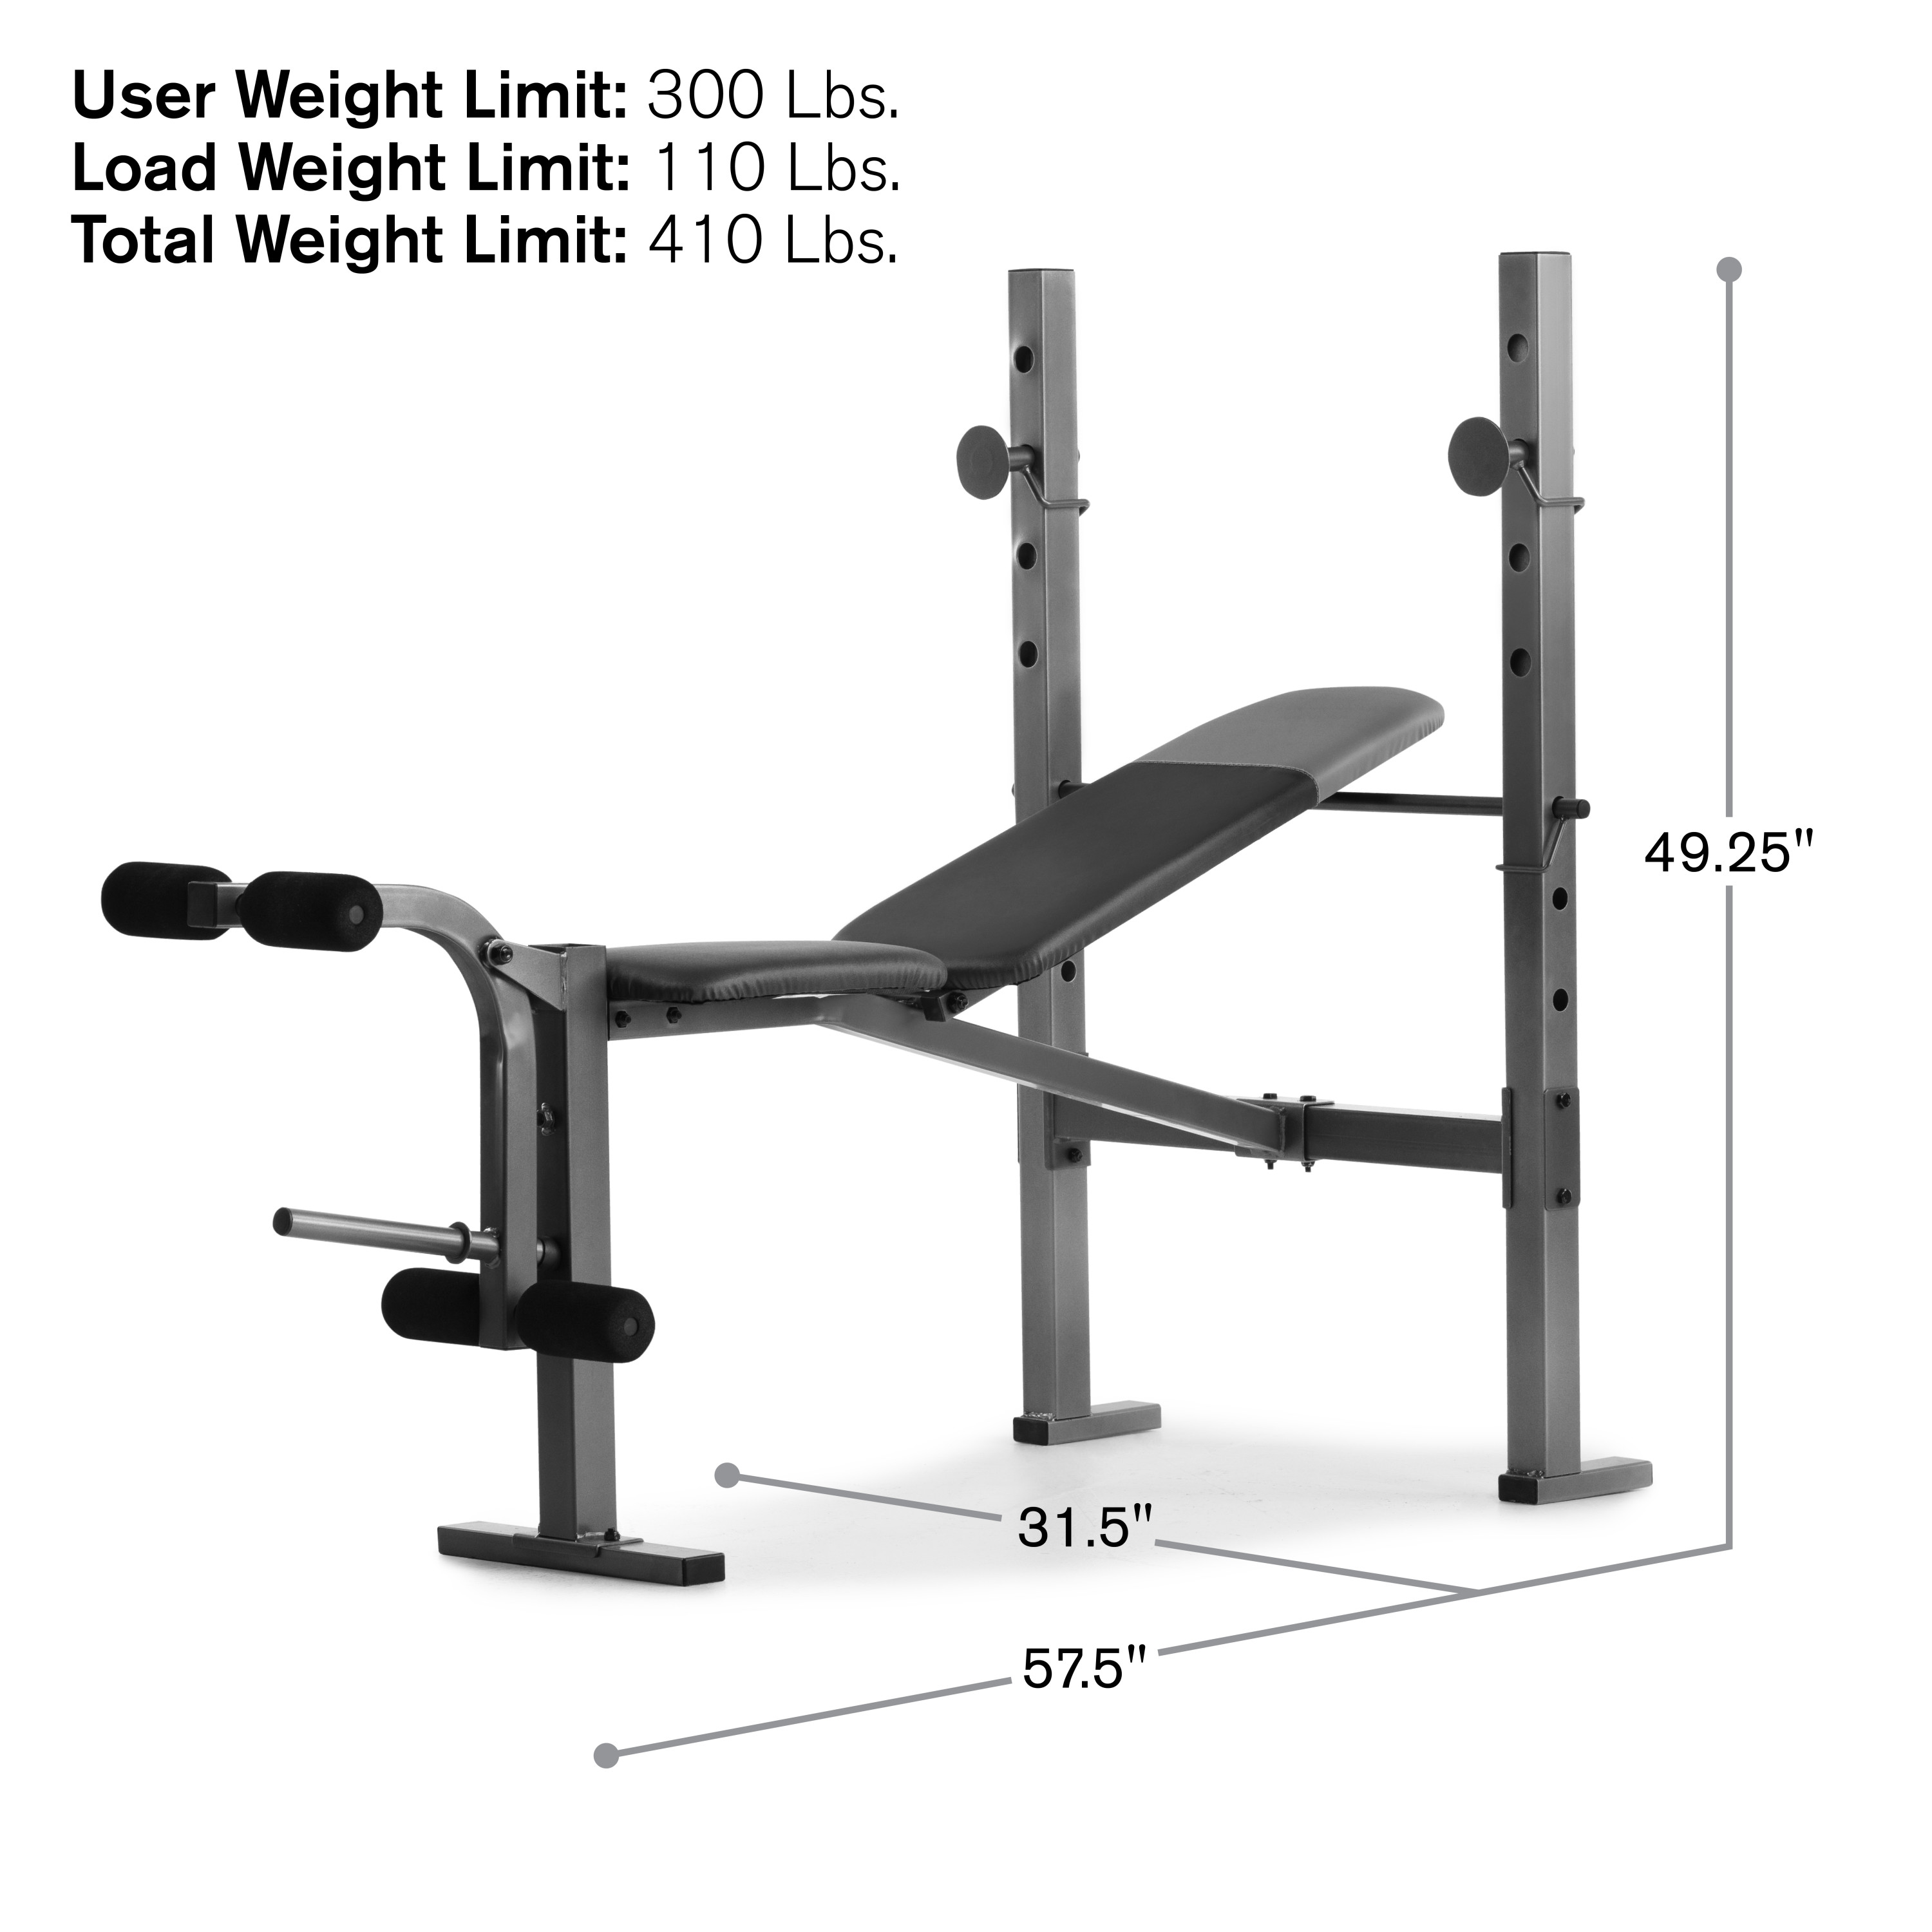 Weider XR 6.1 Adjustable Weight Bench with Leg Developer, 410 lb. Weight Limit - image 4 of 12